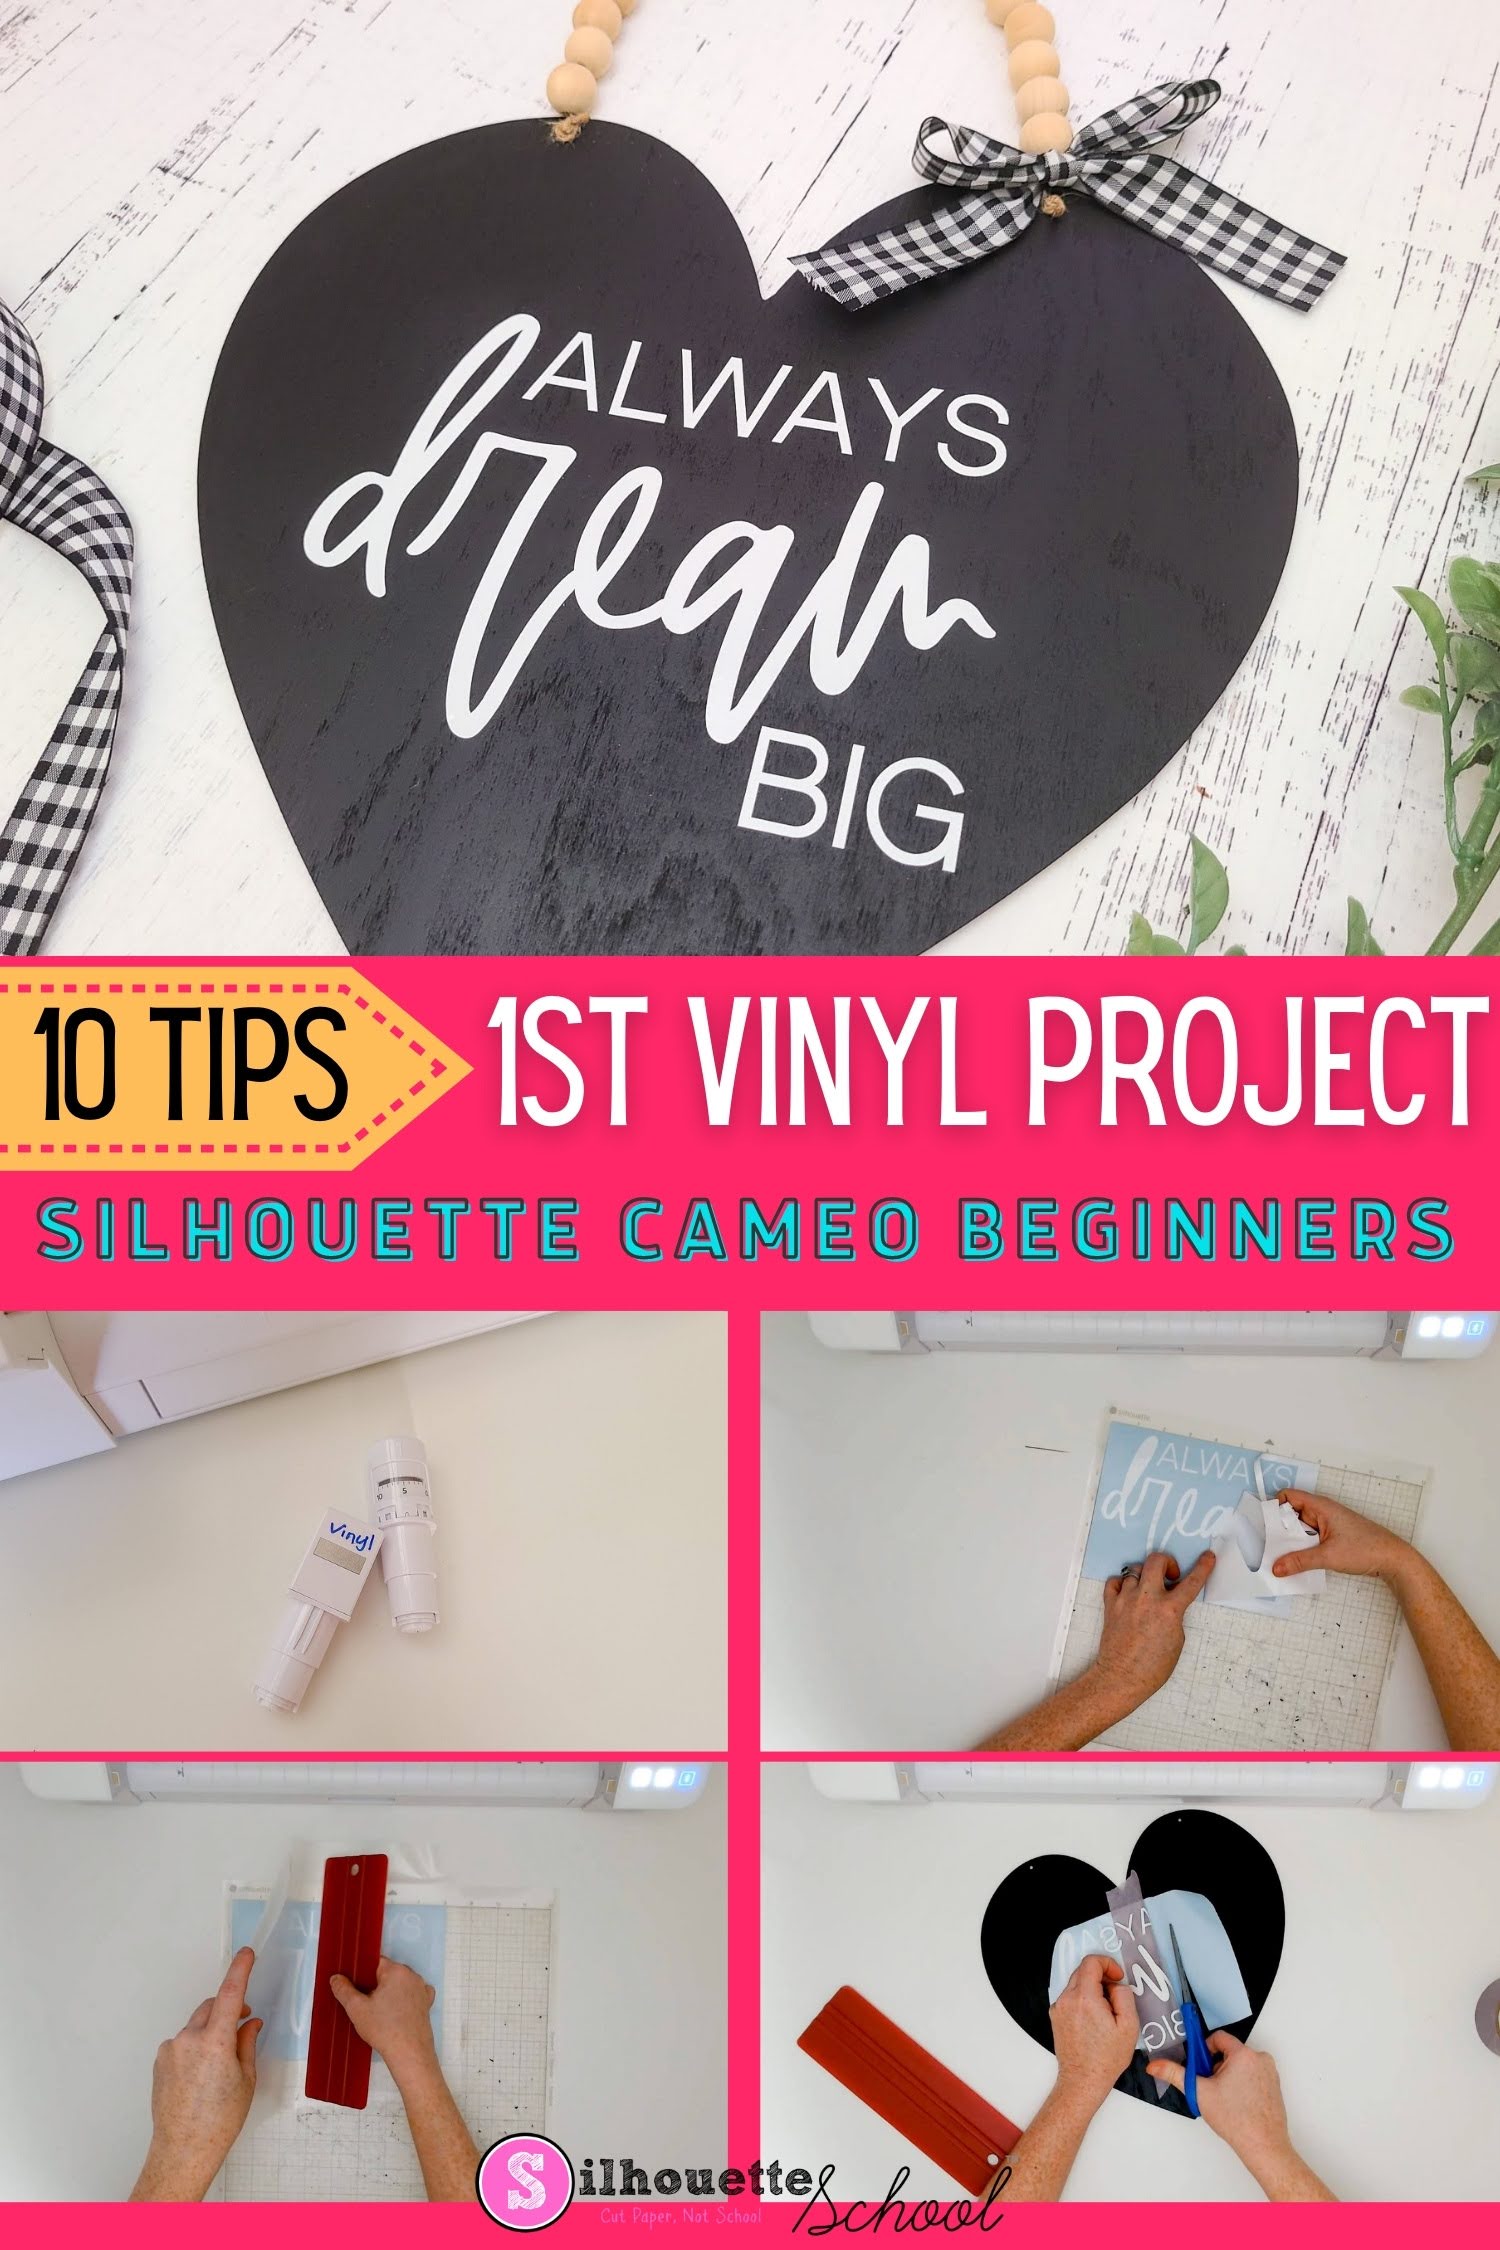 How to Use Adhesive Vinyl: A Beginner's Guide to Cutting and